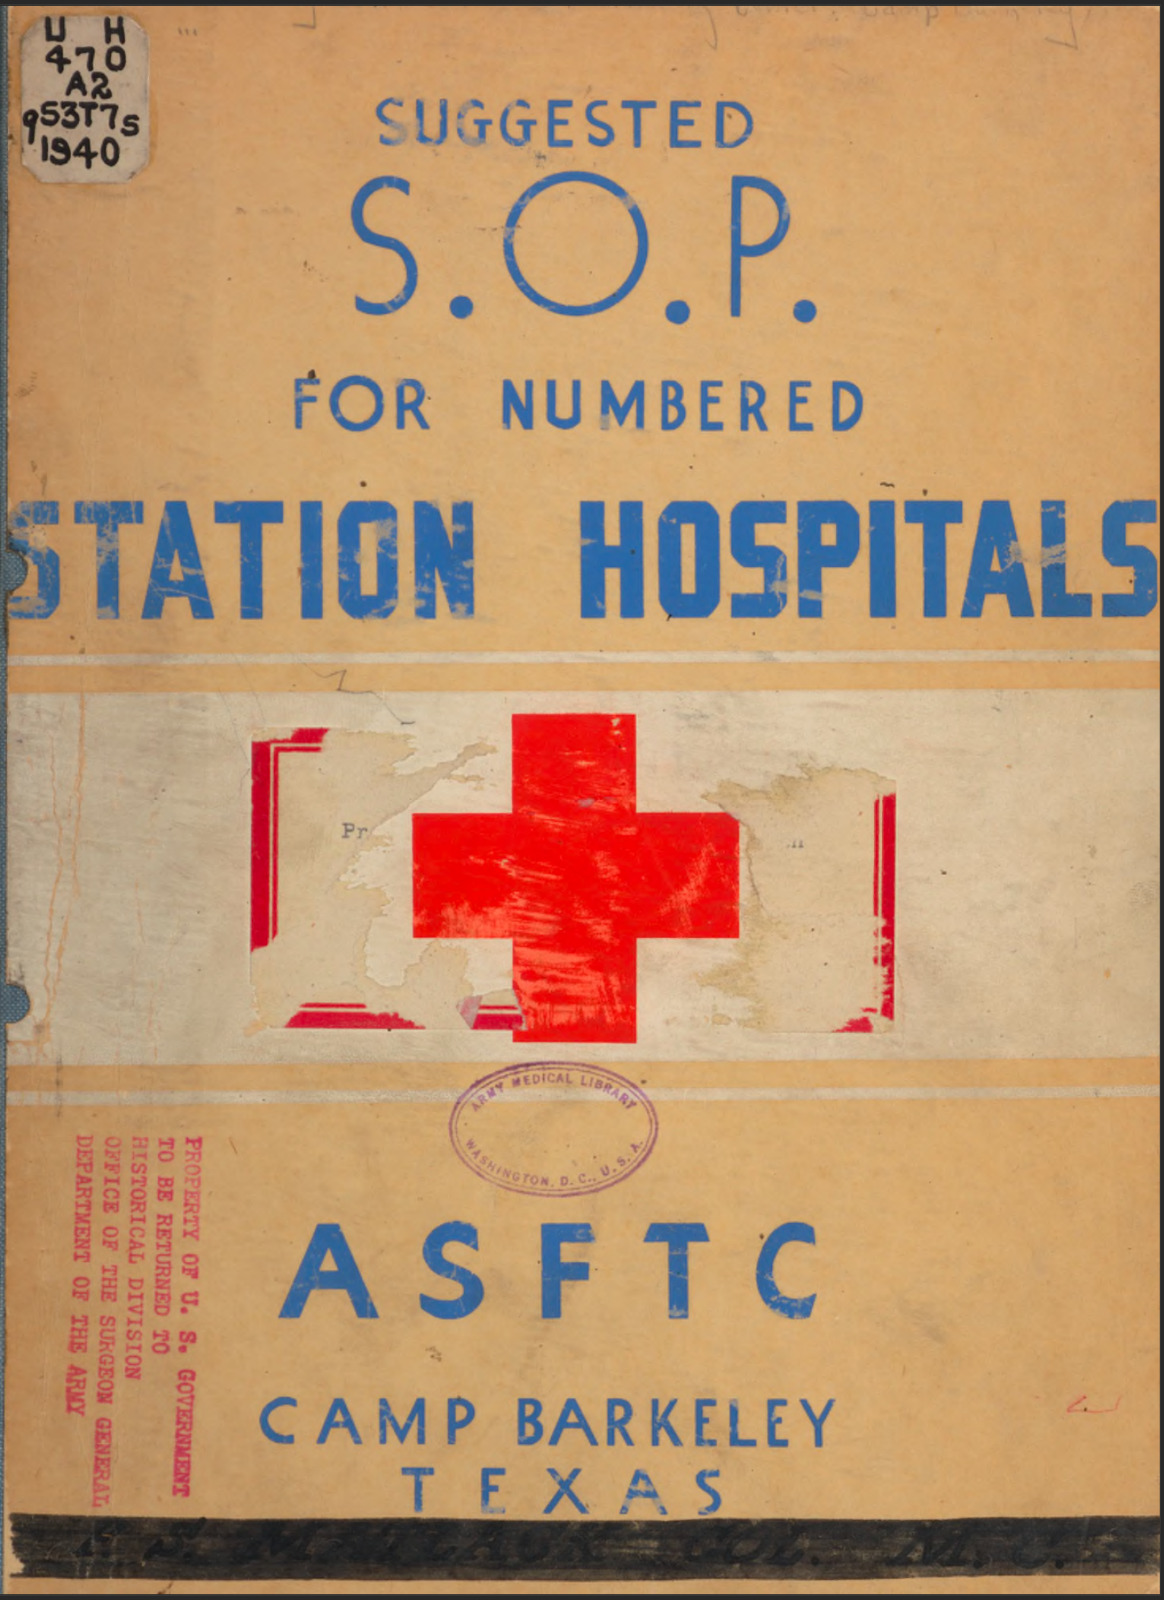 275 Page 1940 SOP For Station Hospitals ASFTC Camp Barkeley TX Manual on Data CD